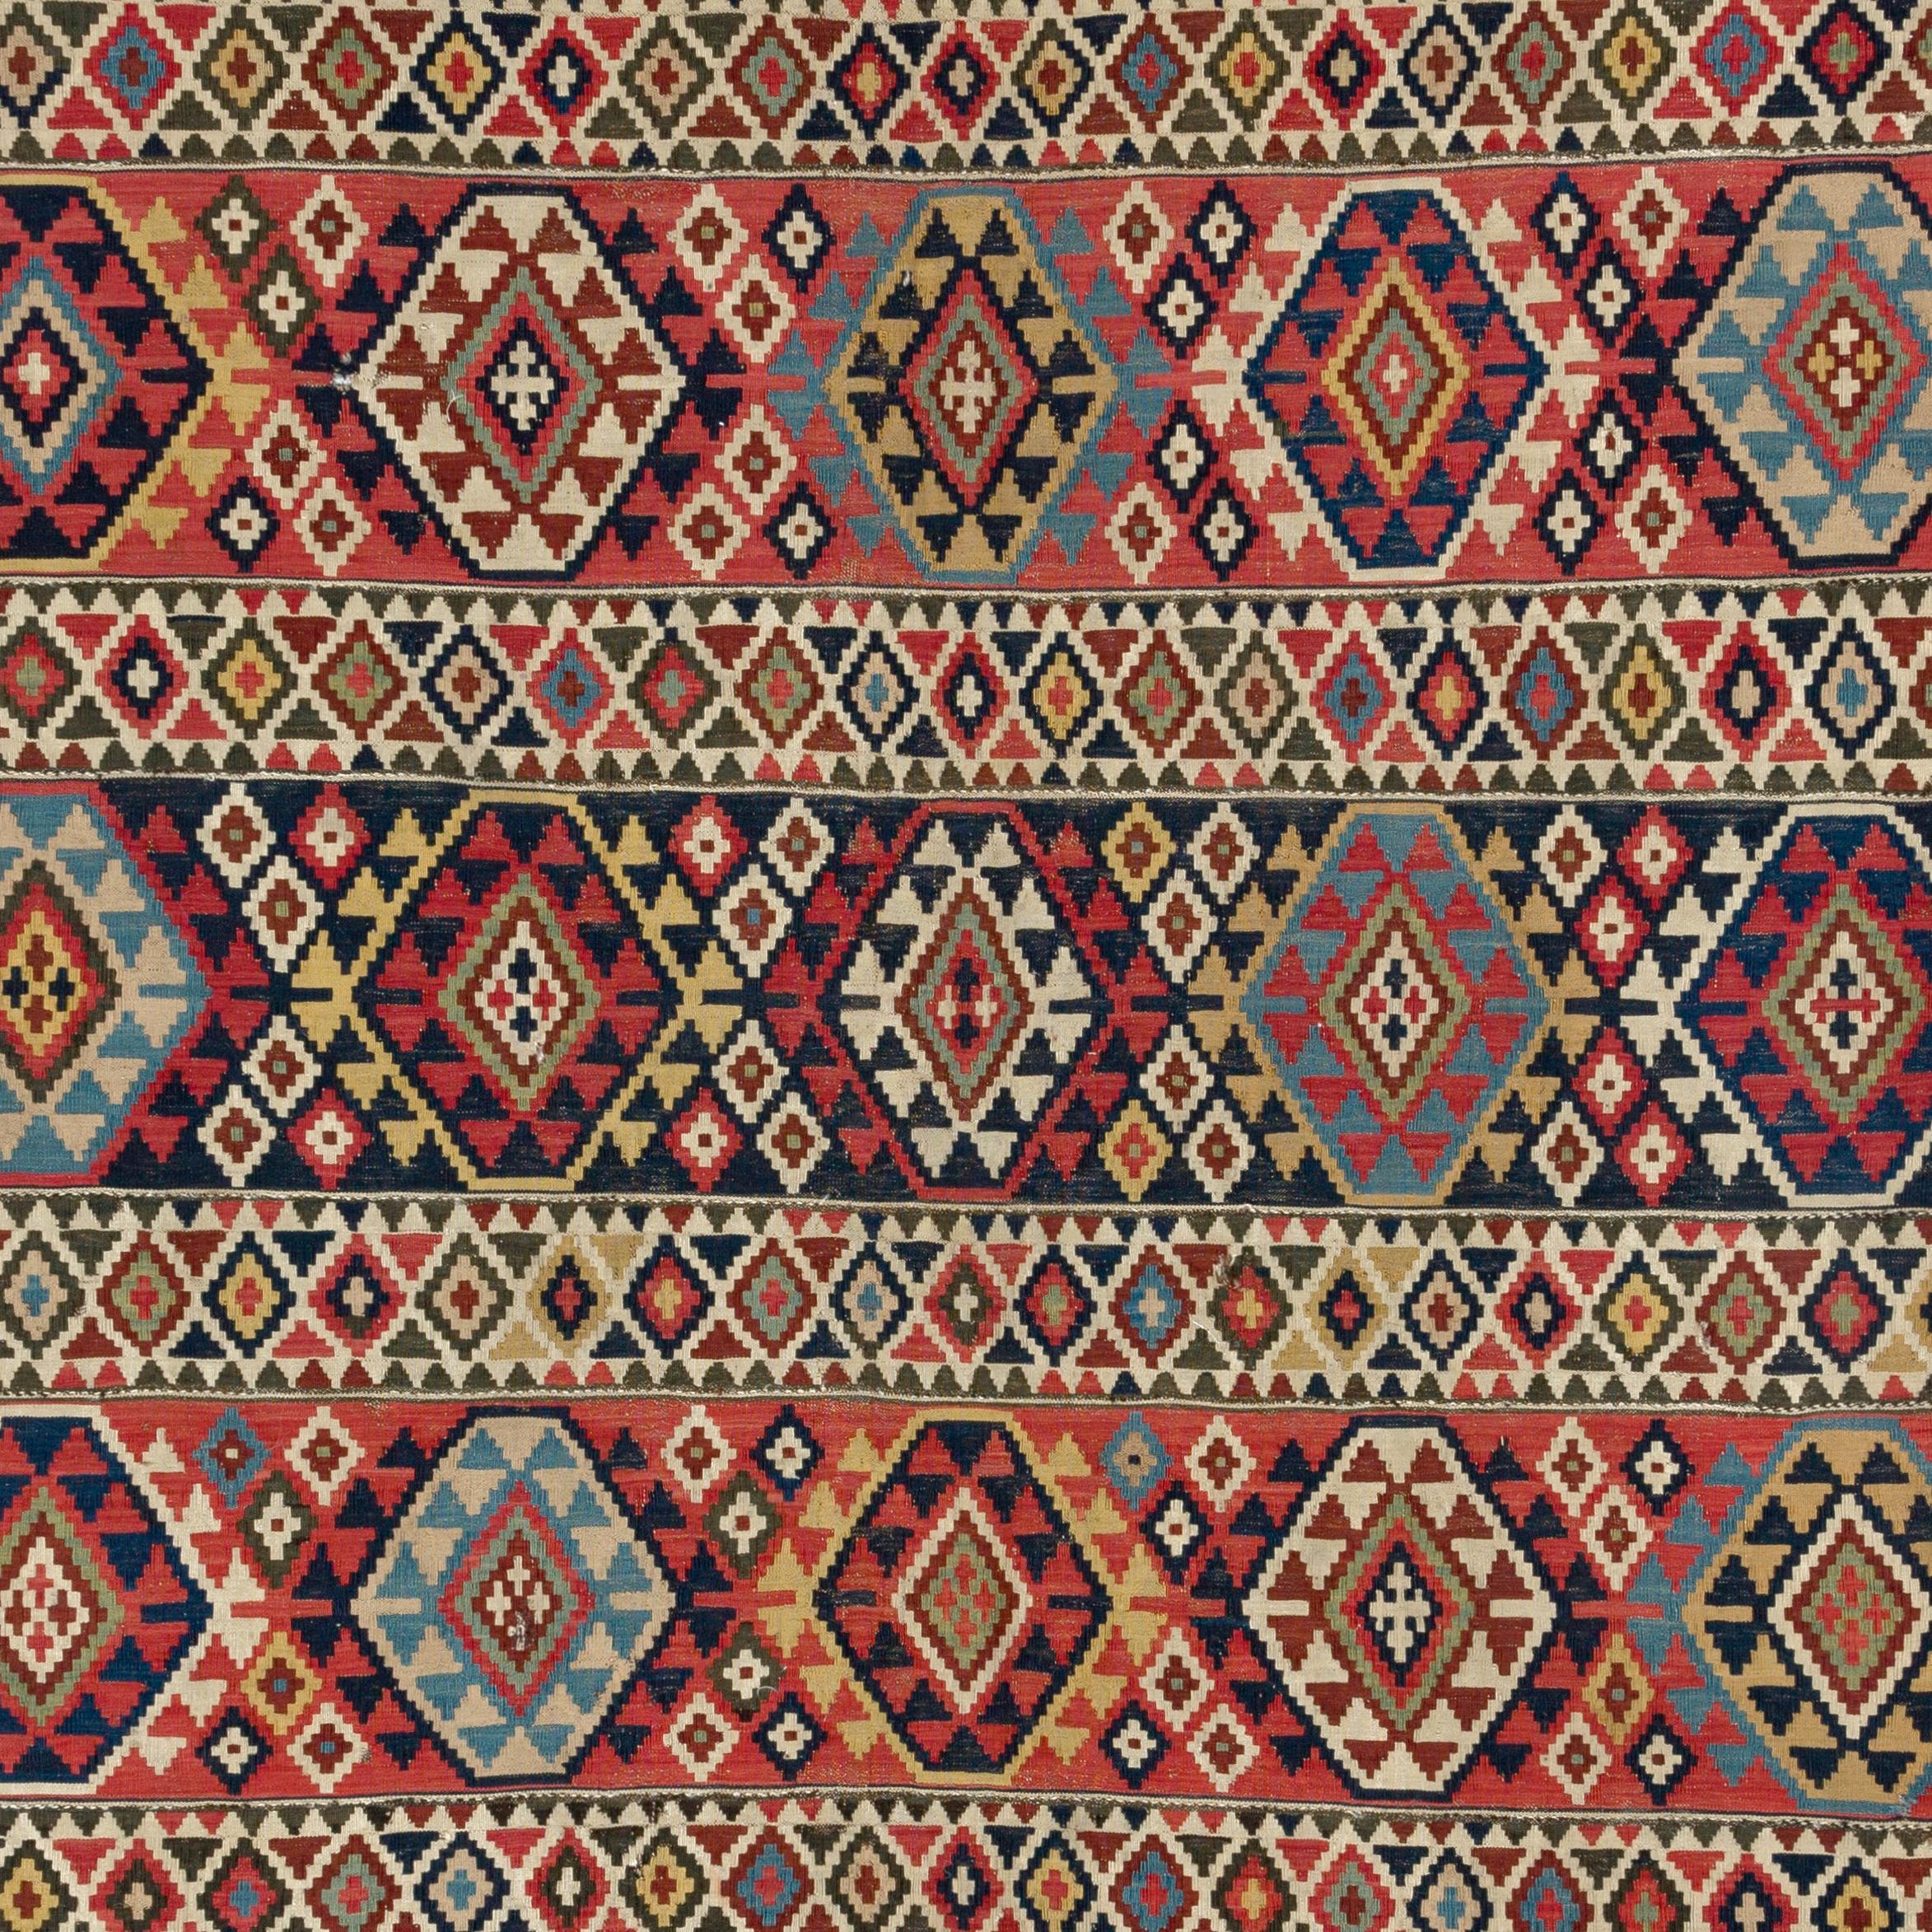 Hand-Woven 5.2x10 Ft Antique Caucasian Shirvan Kilim Rug, Ca 1870, 100% Wool & Natural Dyes For Sale